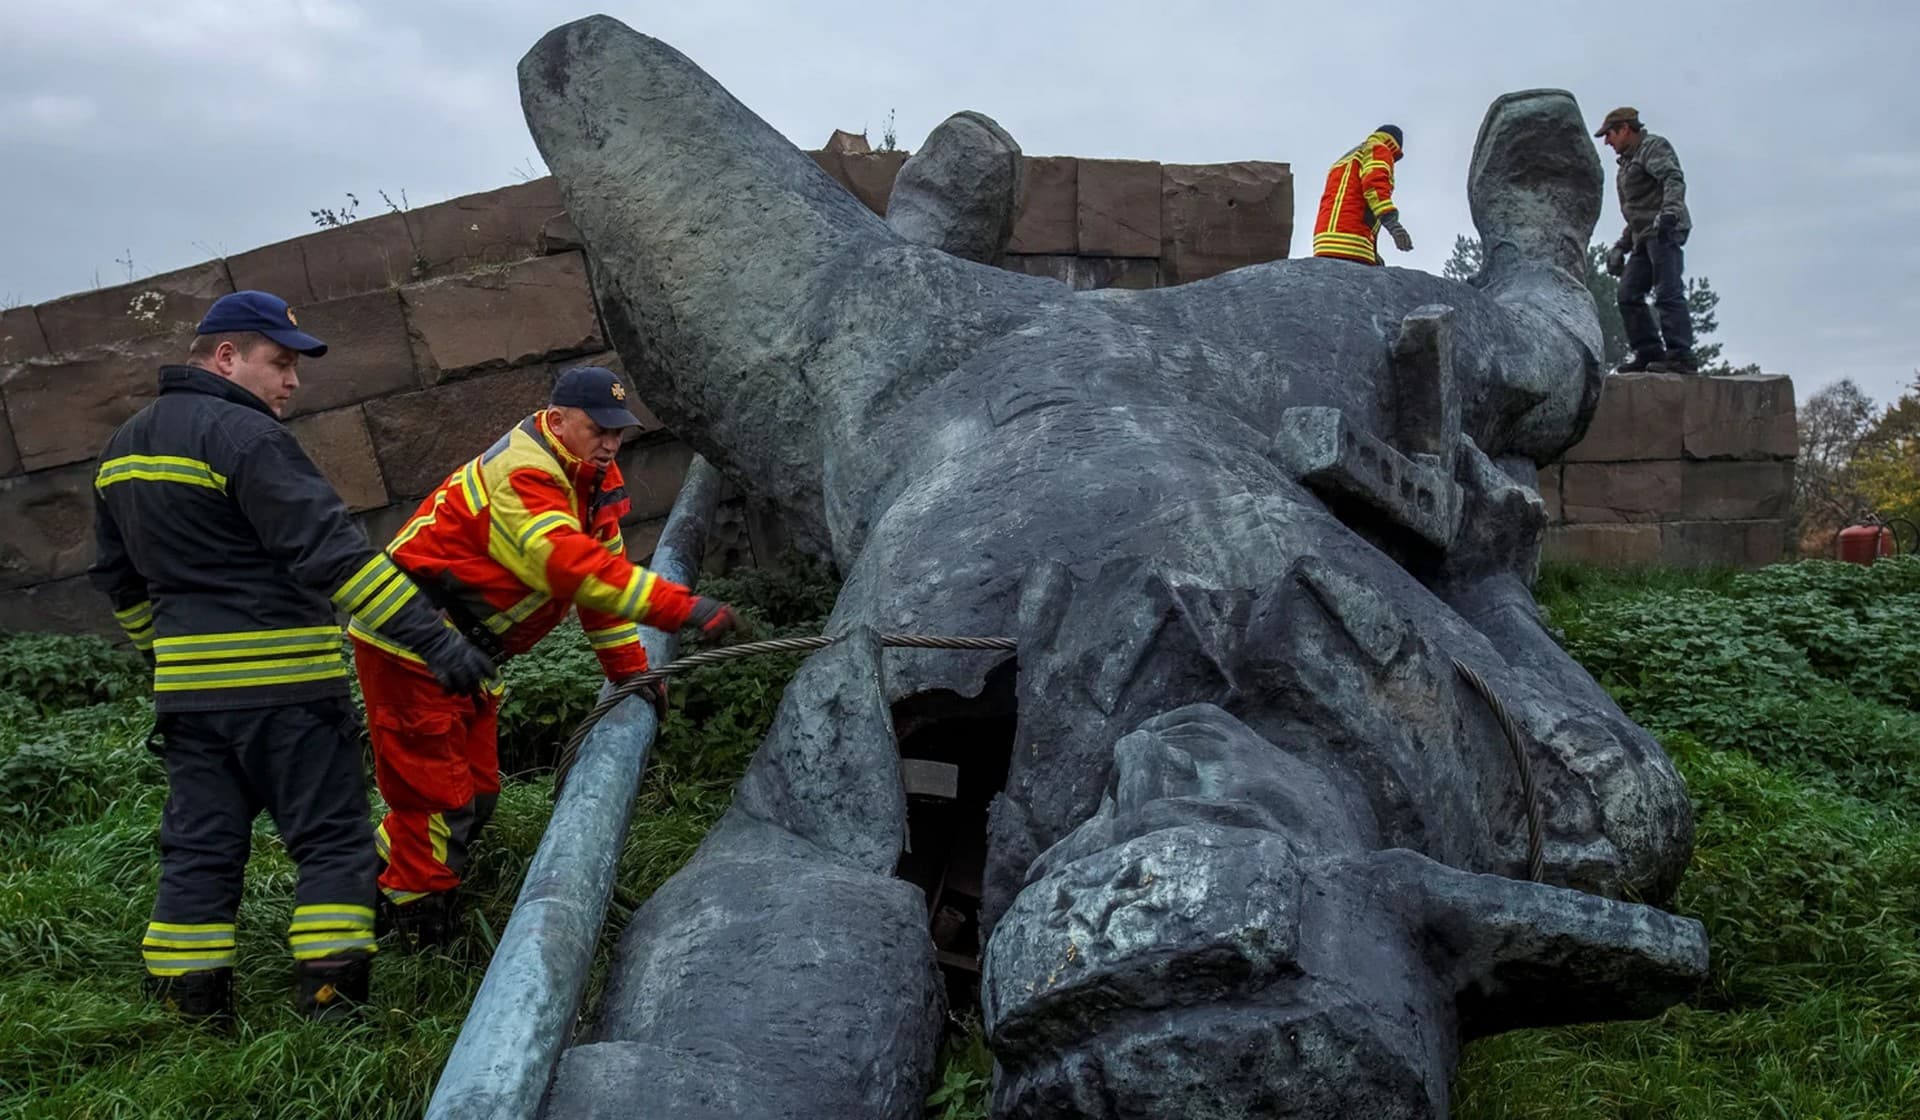 Members of the State Emergency Service inspect a dismantled monument dedicated to Soviet liberators following a decision by local authorities in Uzhhorod